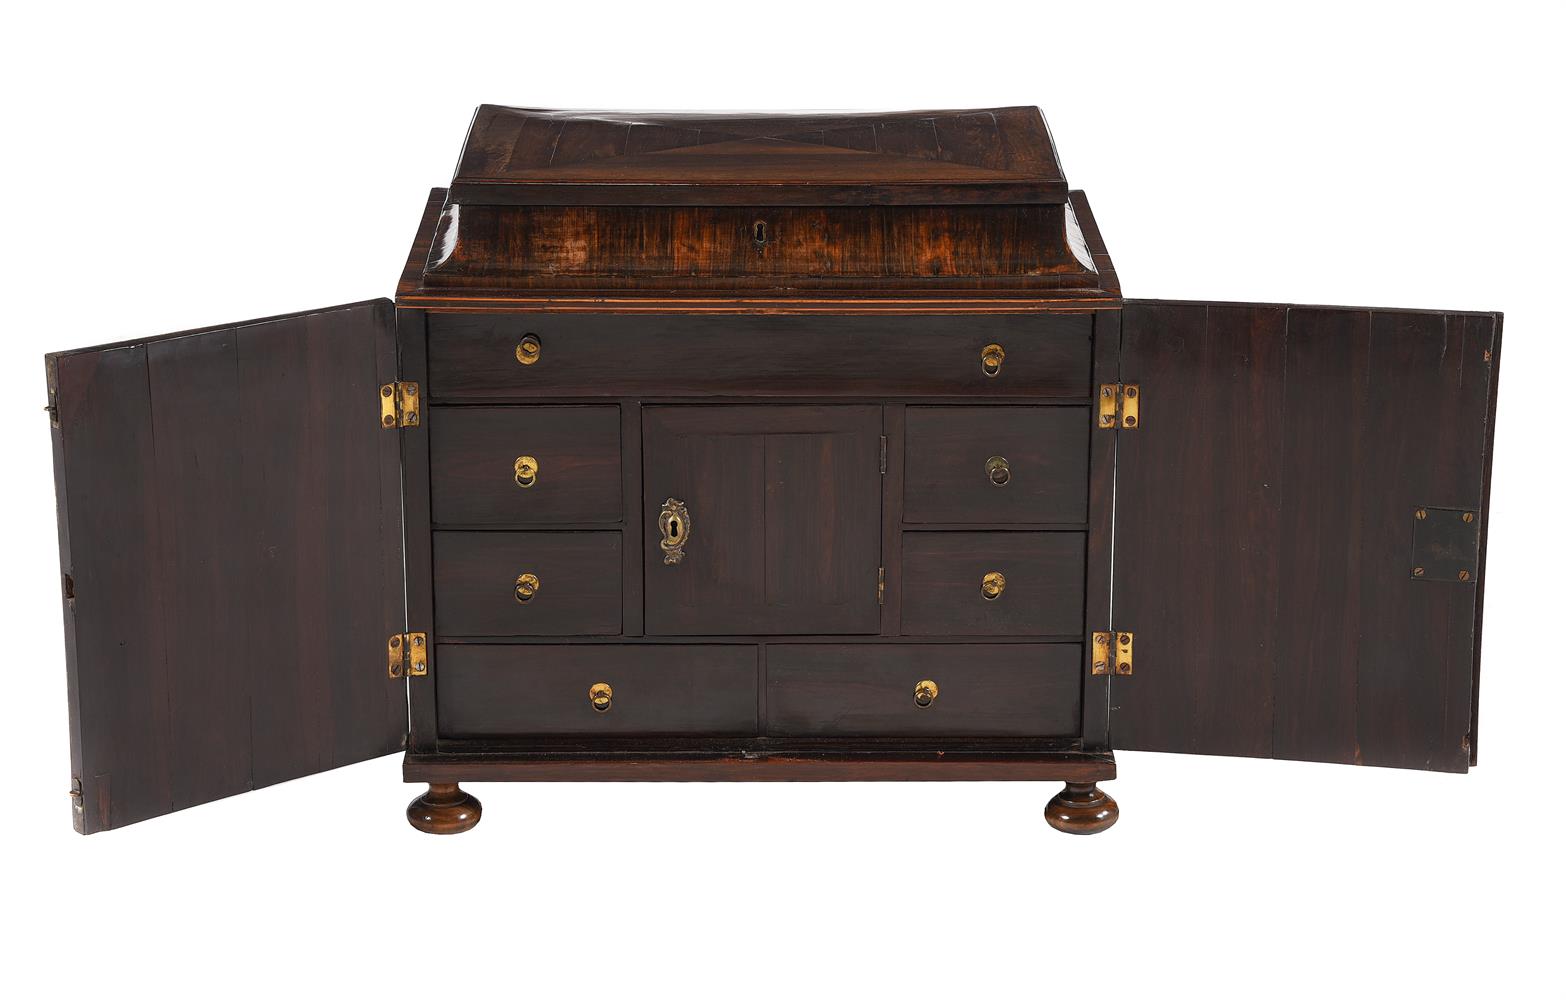 Y A ROSEWOOD AND EXOTIC TIMBER TABLE CABINET, PROBABLY INDO-PORTUGUESE - Image 5 of 5